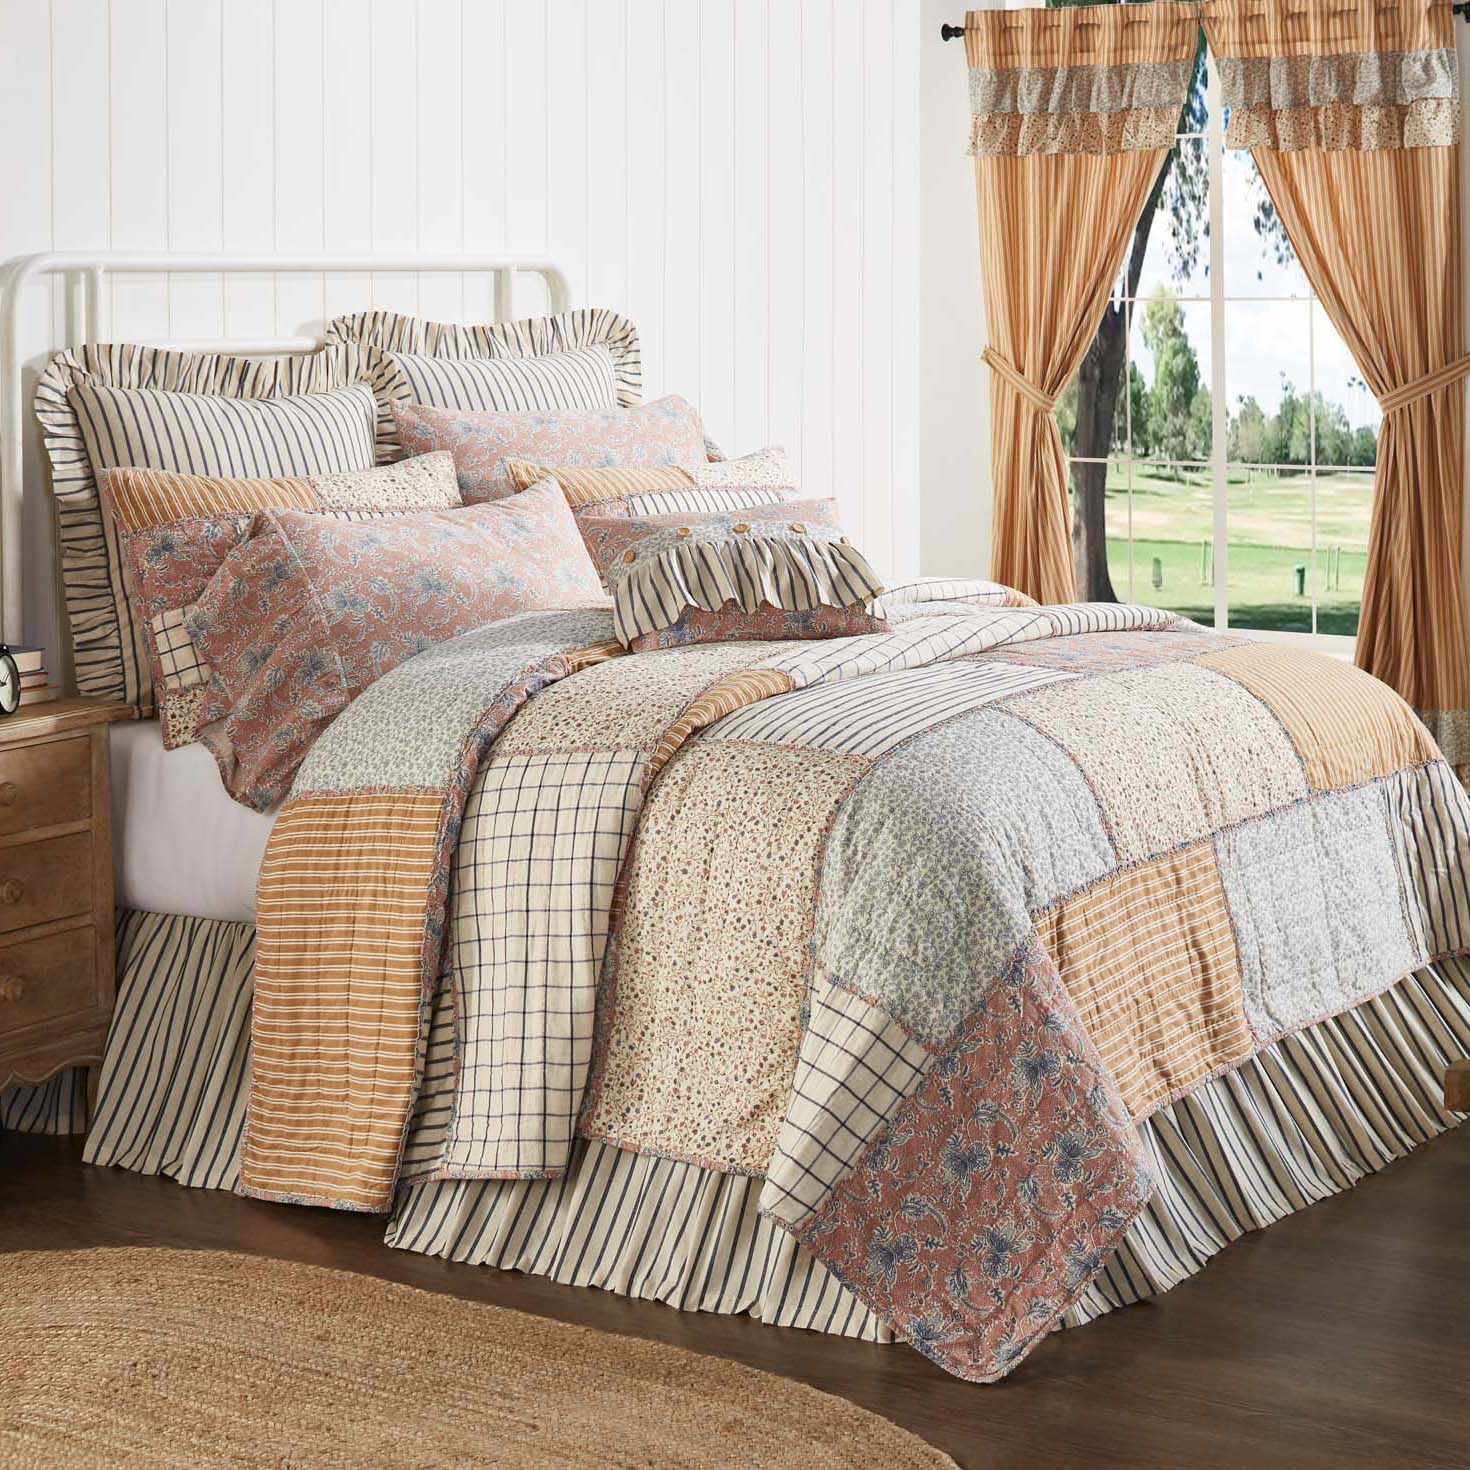 Kaila King Quilt 105Wx95L